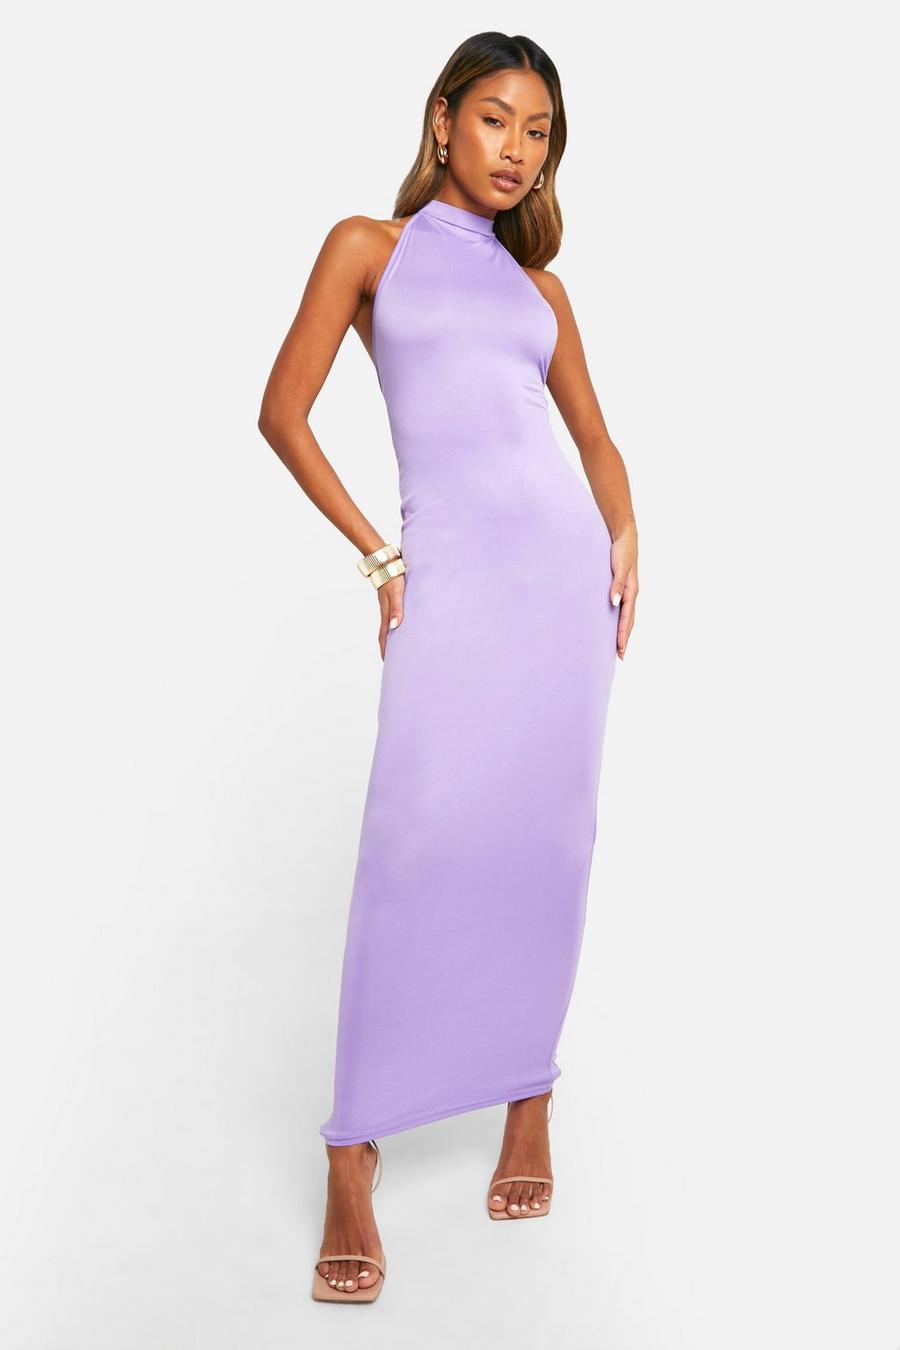 Superweiches Racer-Maxikleid, Lilac image number 1